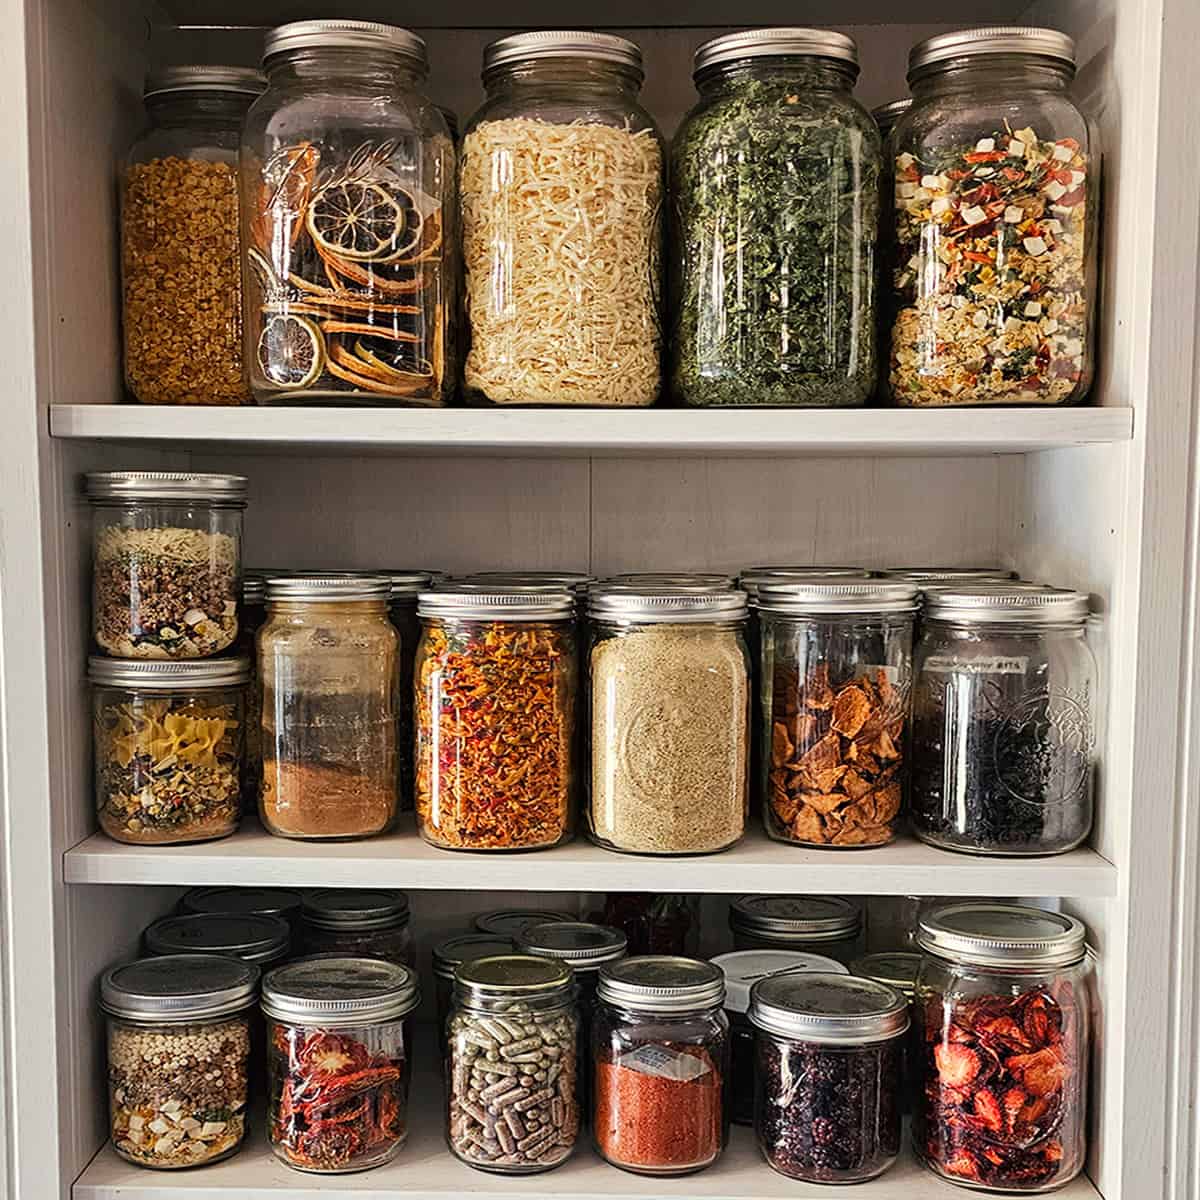 Pantry full of canning jars filled with dehydrated foods